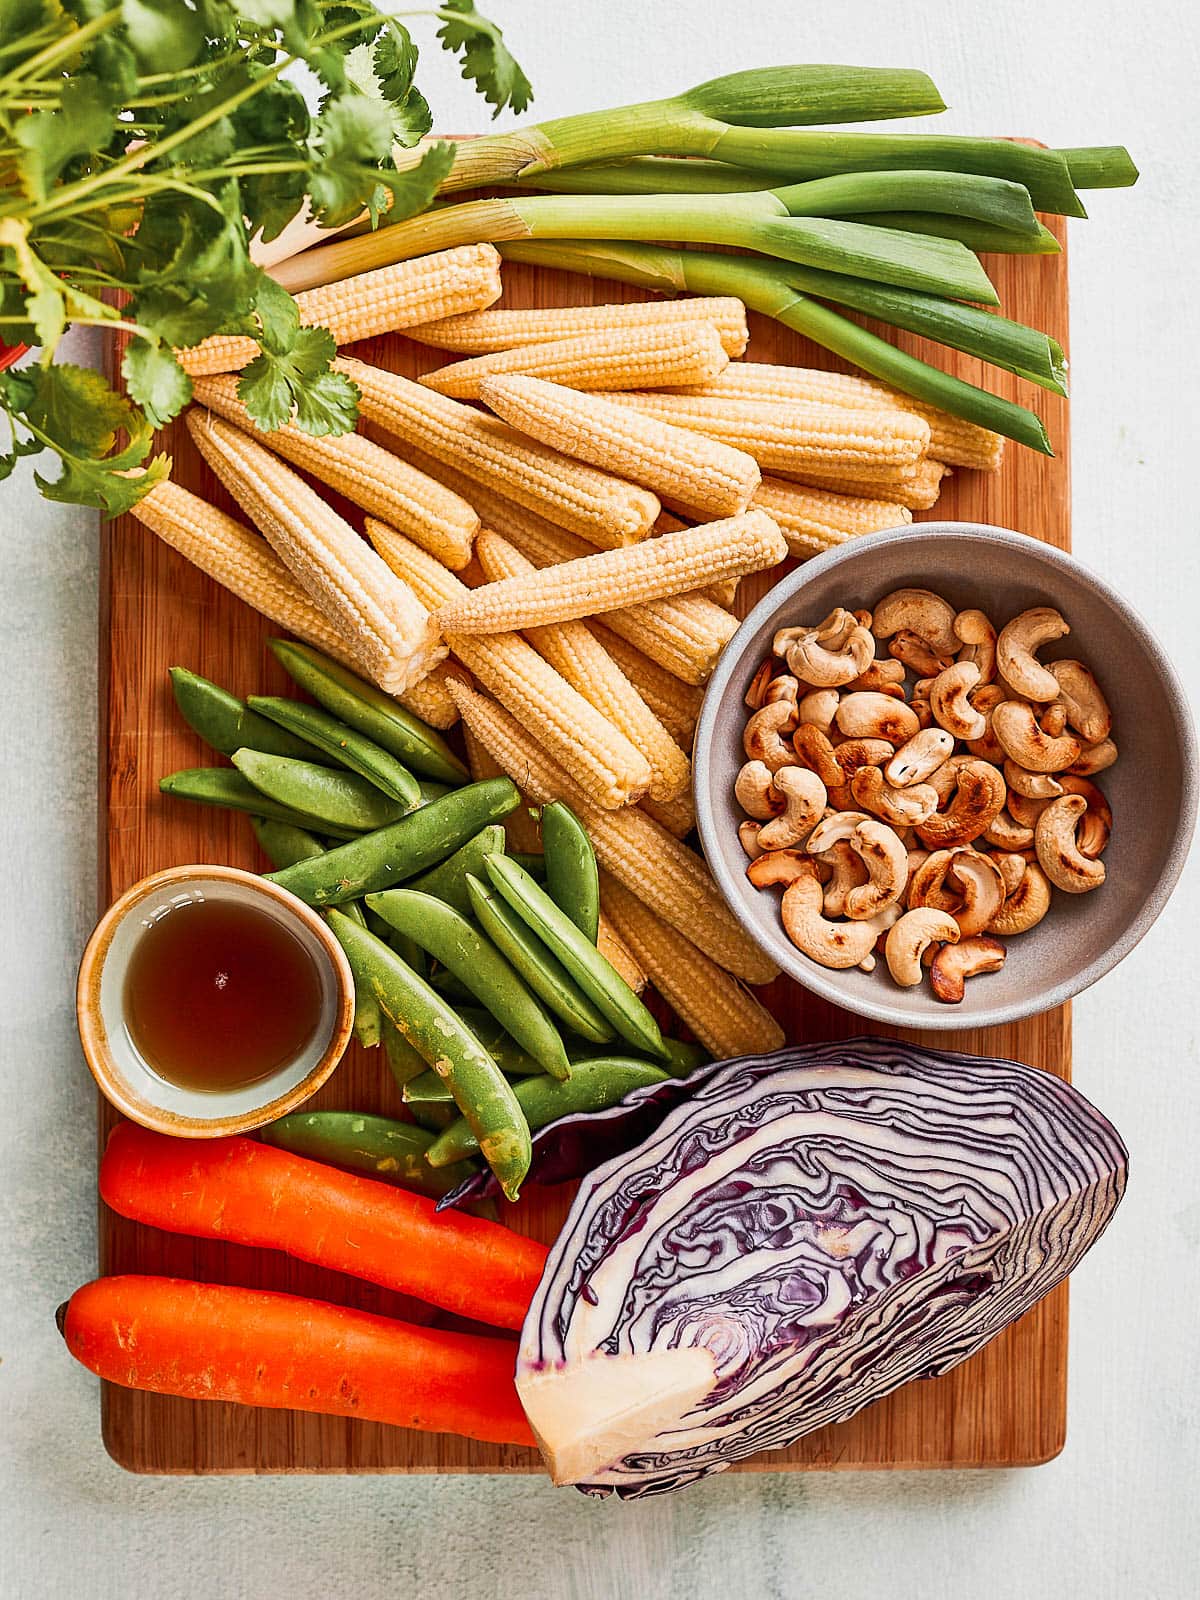 Ingredients for baby corn salad- baby corn, spring onions, cilantro, mangetout, cashews, sesame oil, carrots and red cabbage